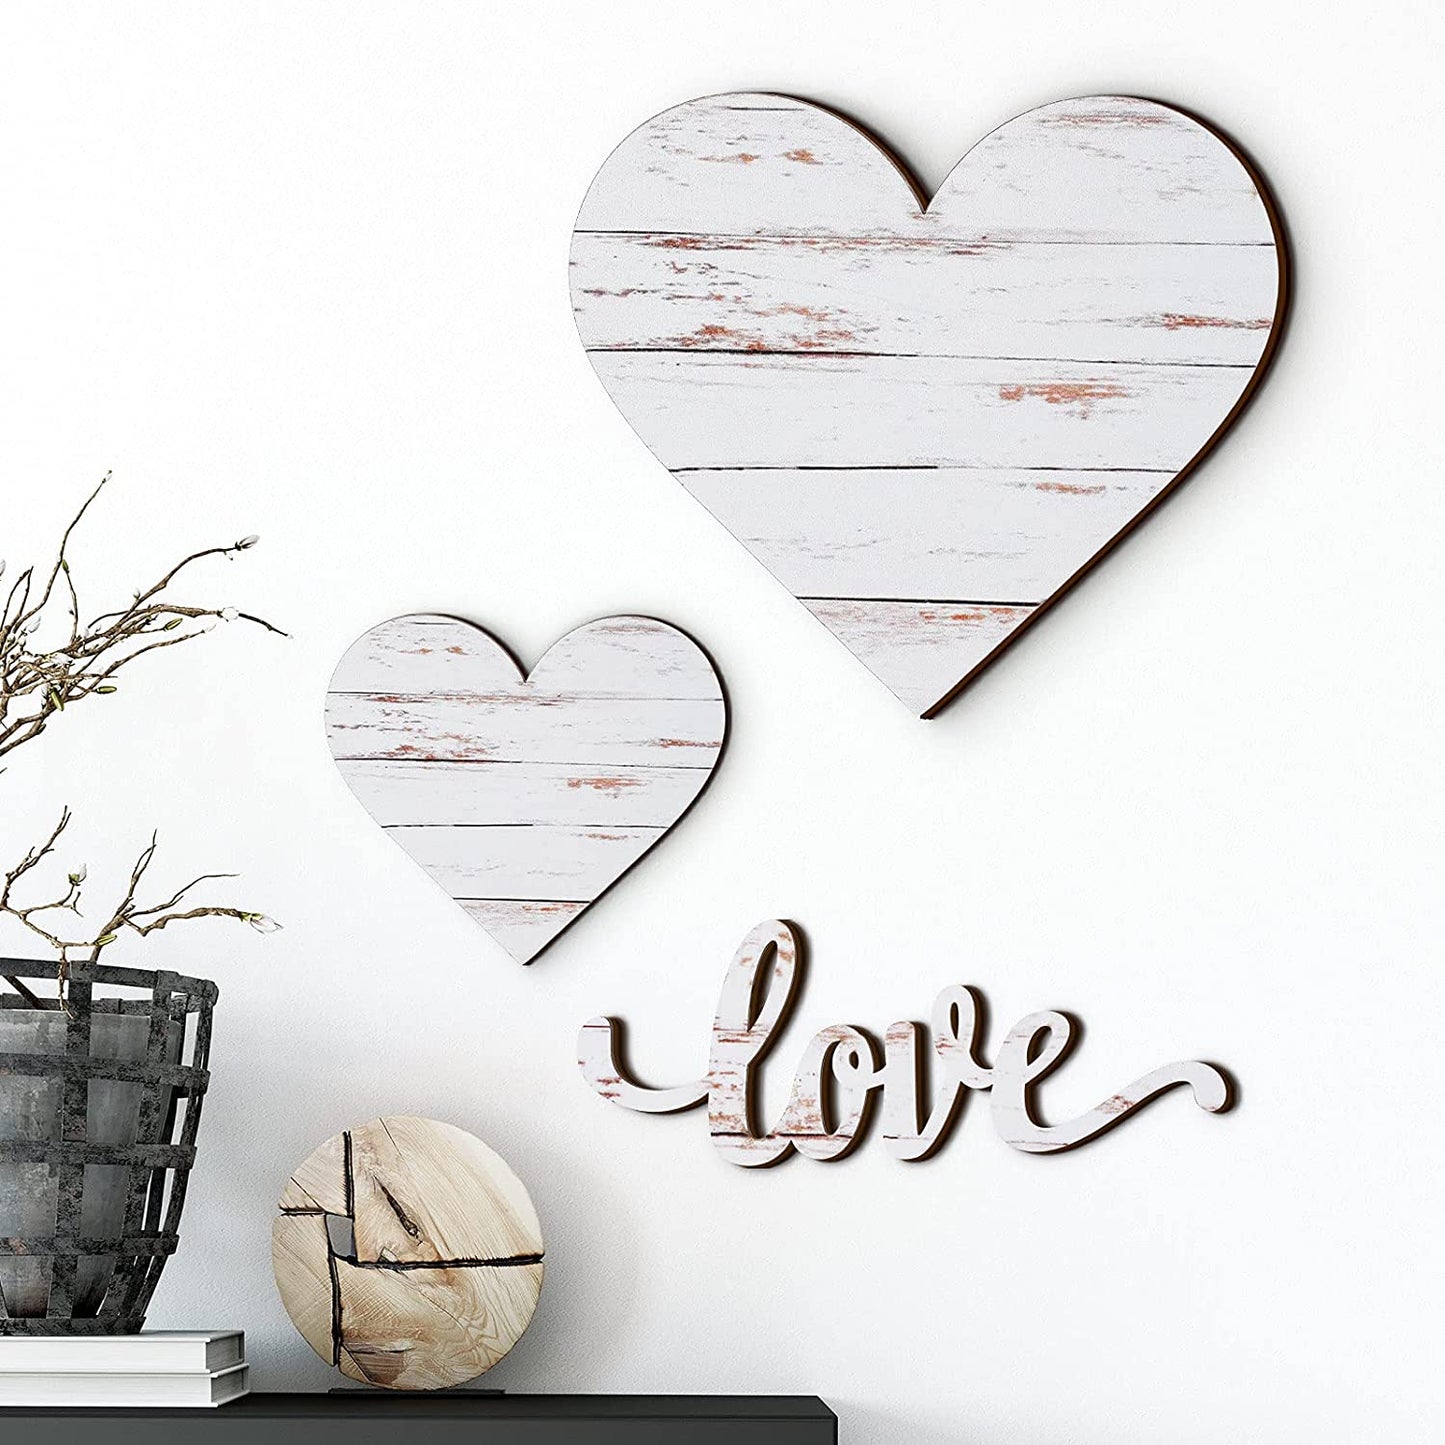 3 Pieces Heart Shaped Wood Sign Heart-Shaped Wooden Wall Sign Wood Heart Wall Decor Rustic Hanging Sign Wooden Heart Plaque for Home Farmhouse Living Room Bedroom (White)